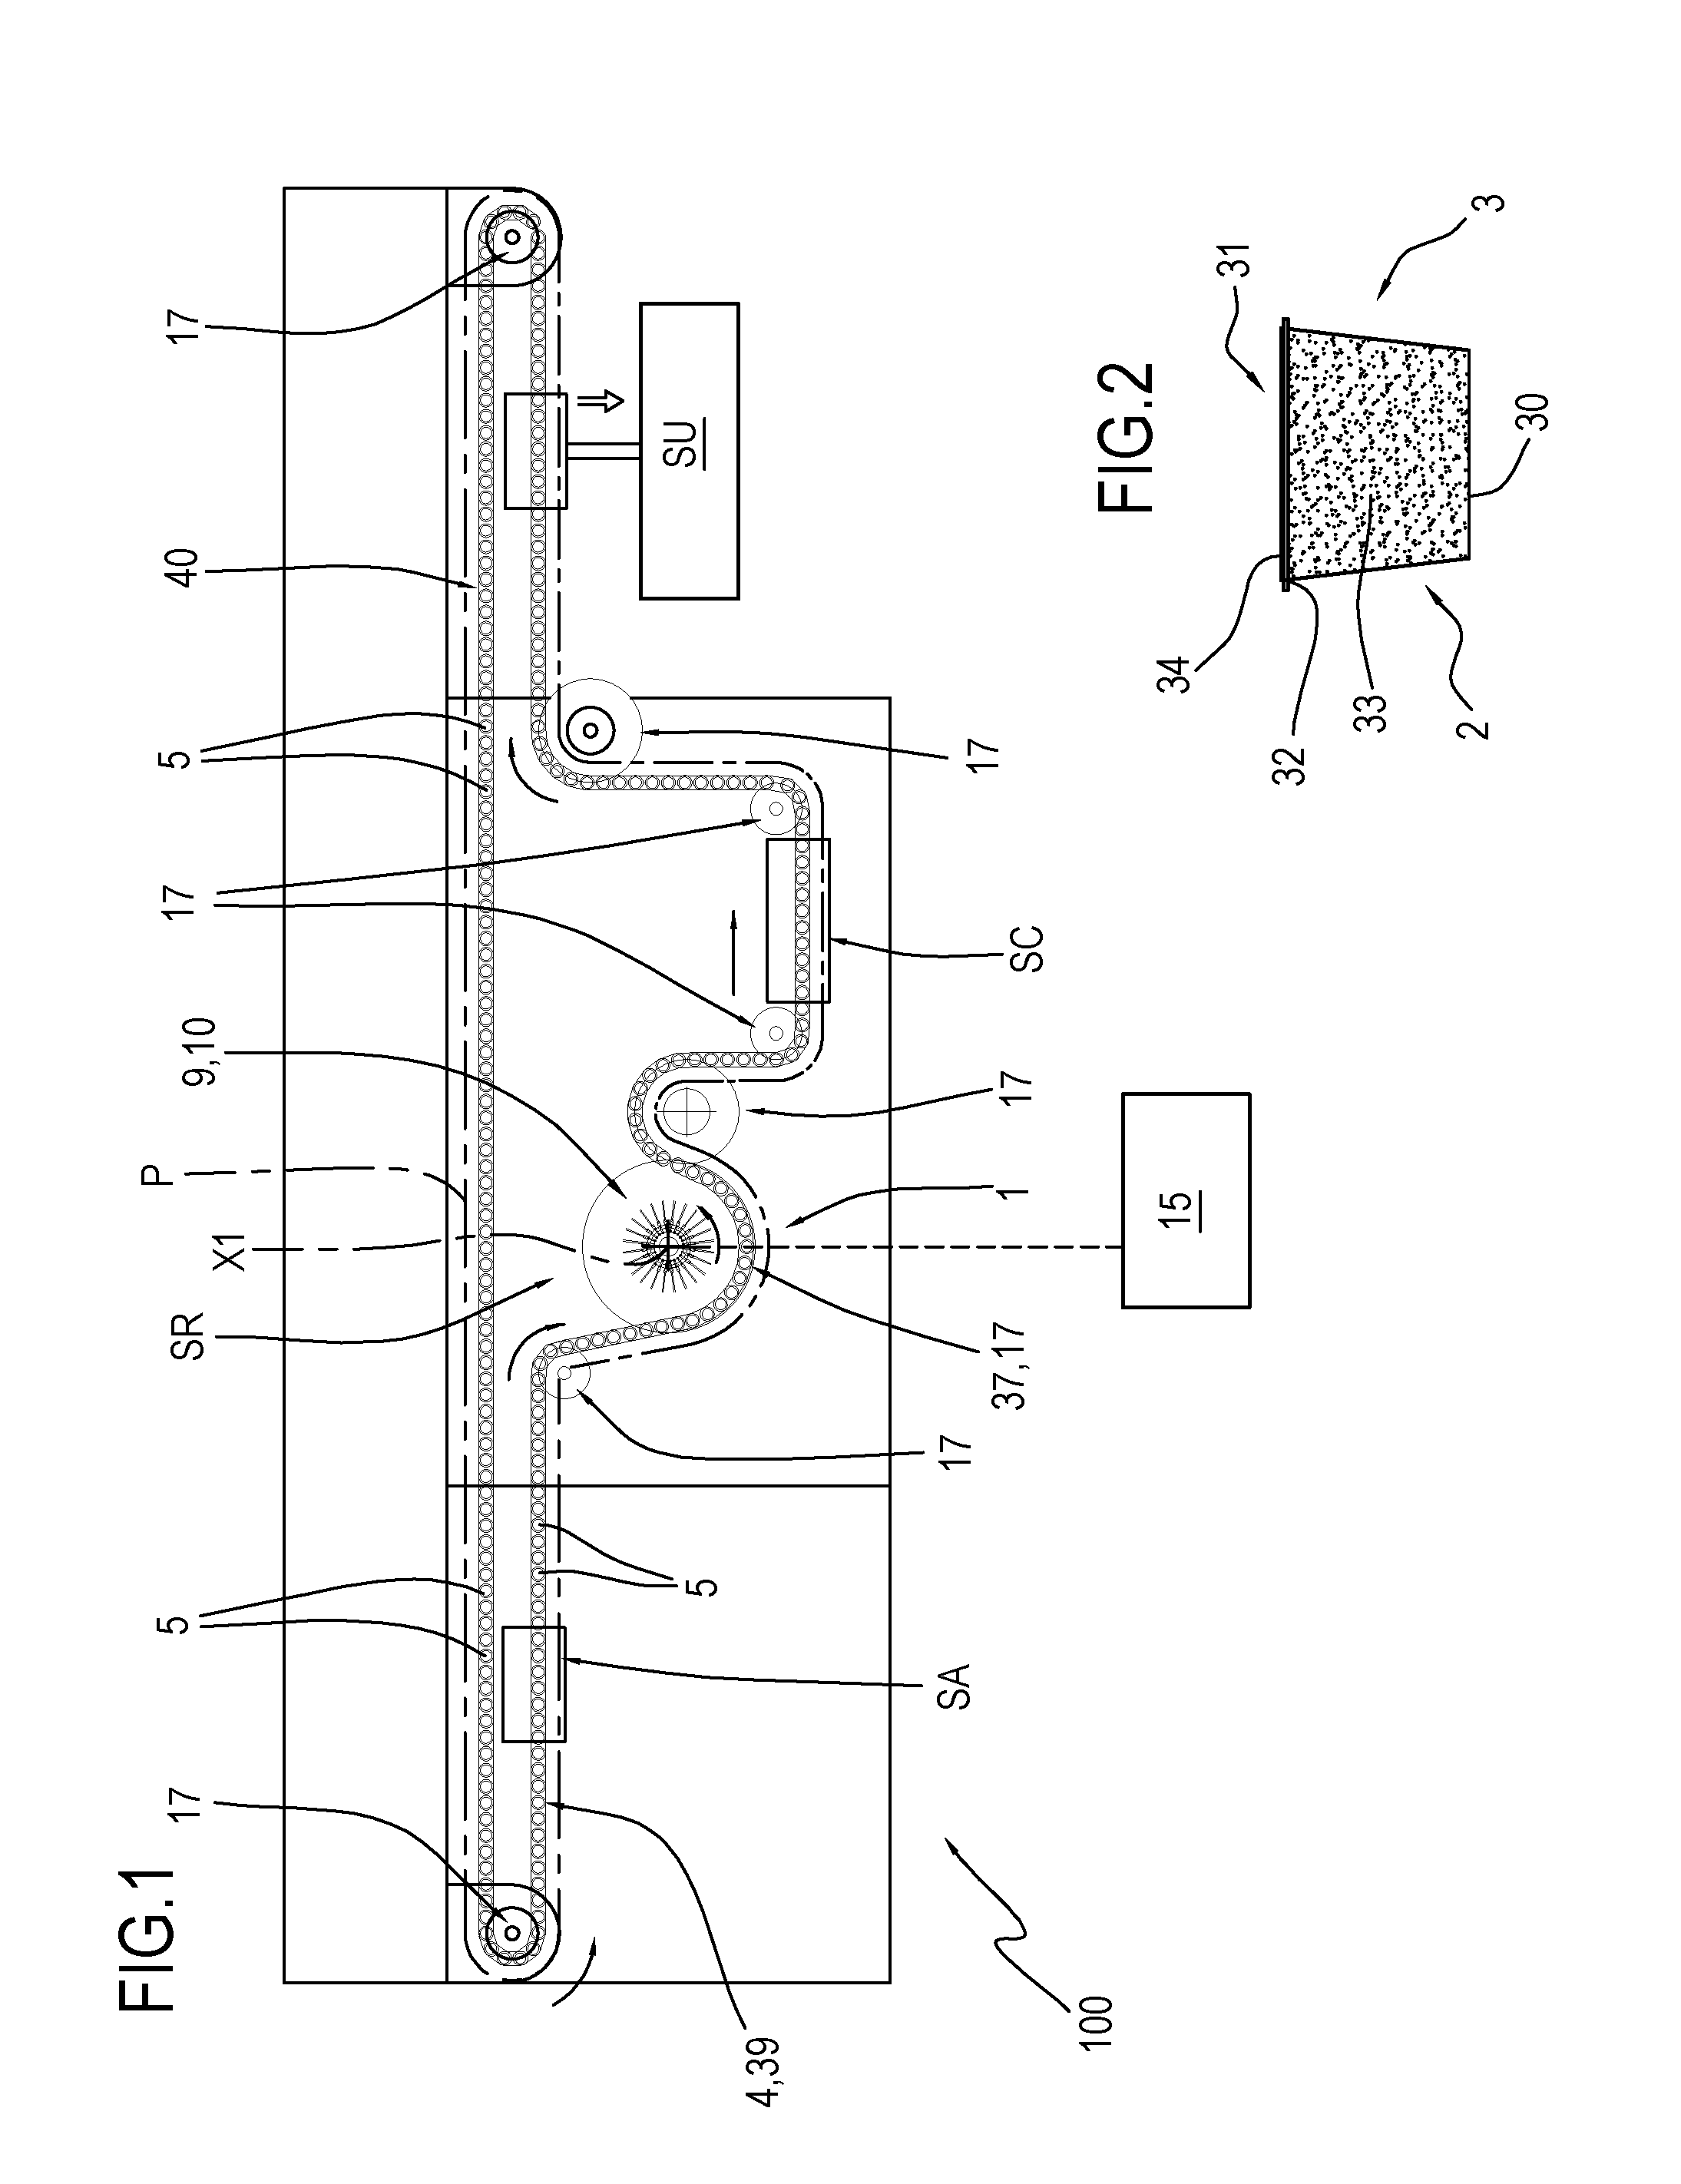 Unit and method for releasing product for extraction or infusion beverages in containers forming single-use capsules or pods